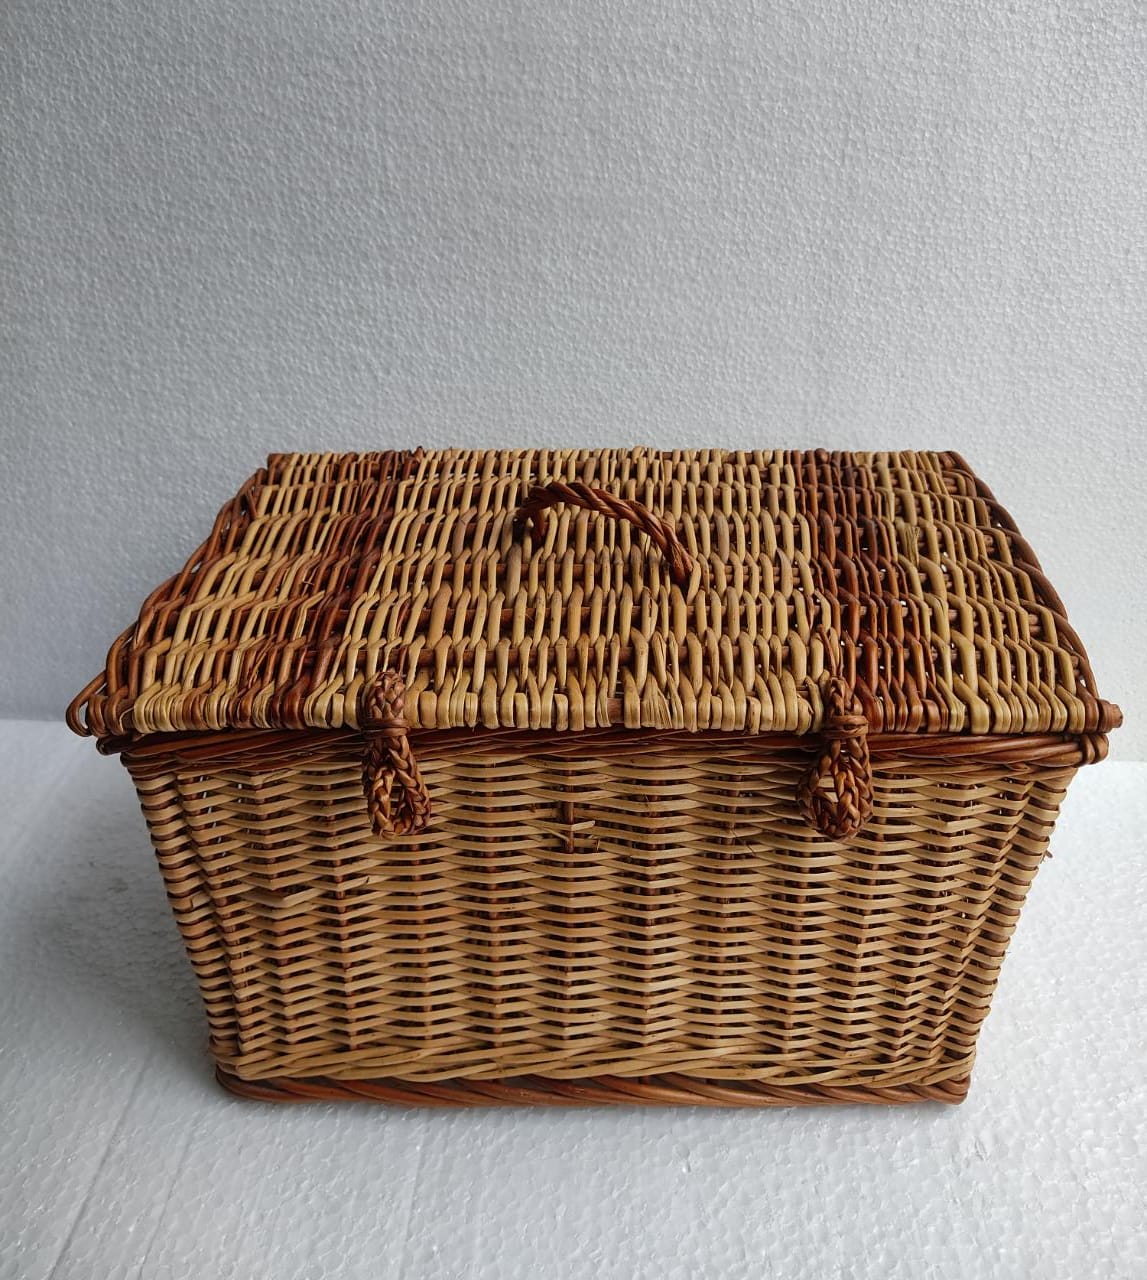 Willow/Wicker Rectangular Storage Box/Laundry Basket with cover